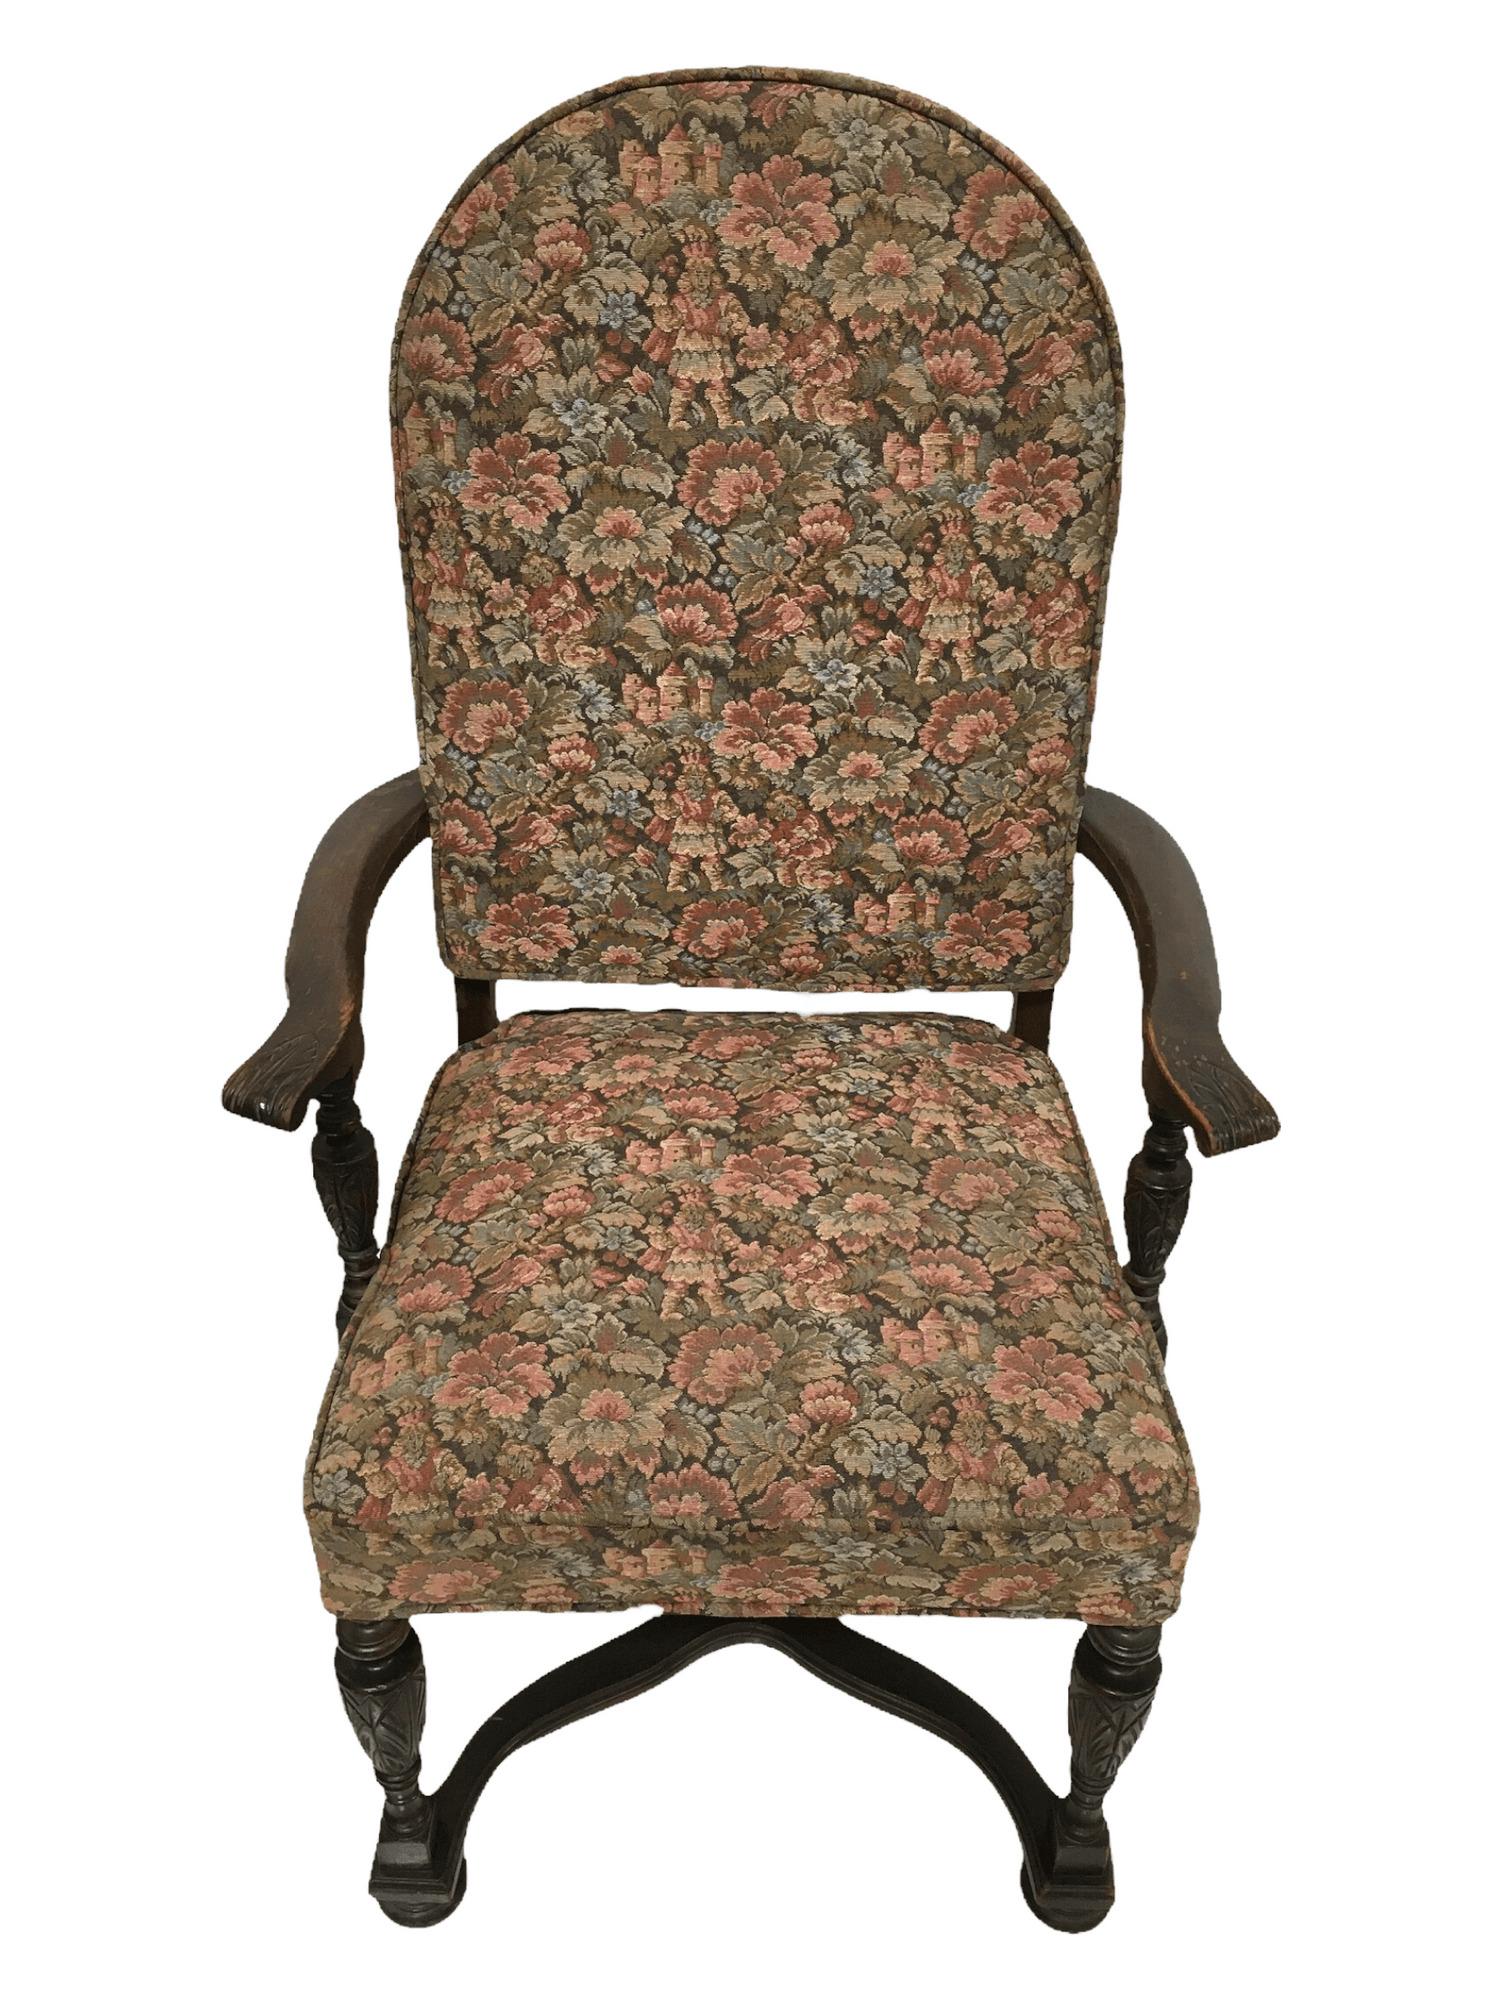 Antique Walnut Throne Armchair with French Tapestry and Carved Wood, 19th XIX In Good Condition For Sale In Van Nuys, CA